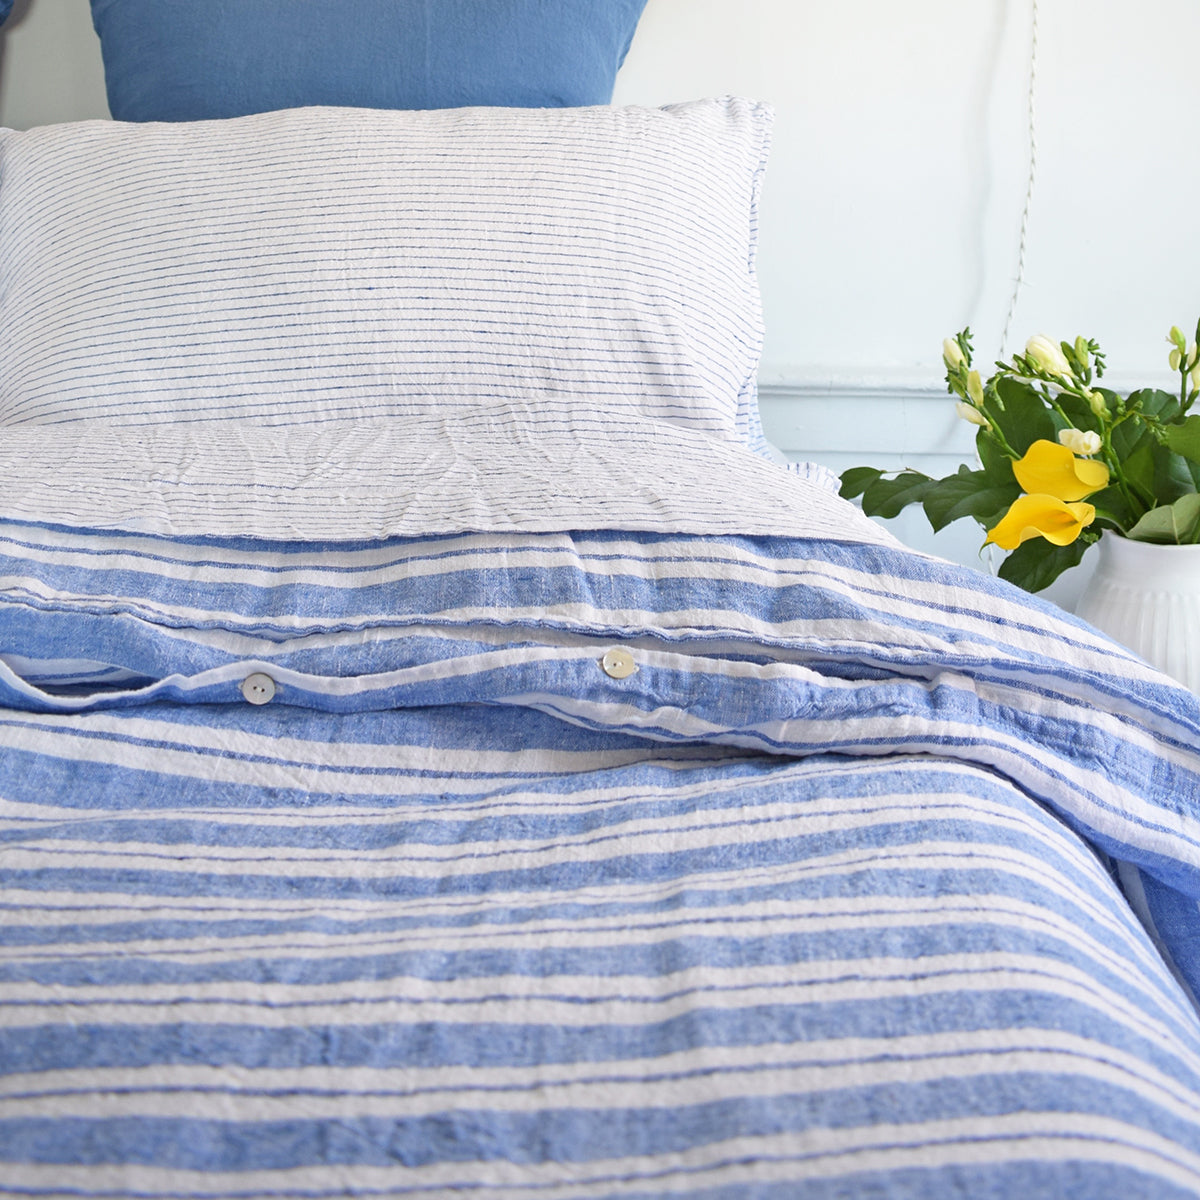 A Linge Particulier Linen Duvet in Large Blue Stripes gives a blue and white stripe color to this duvet for a colorful patterned and printed linen bedding look from Collyer's Mansion